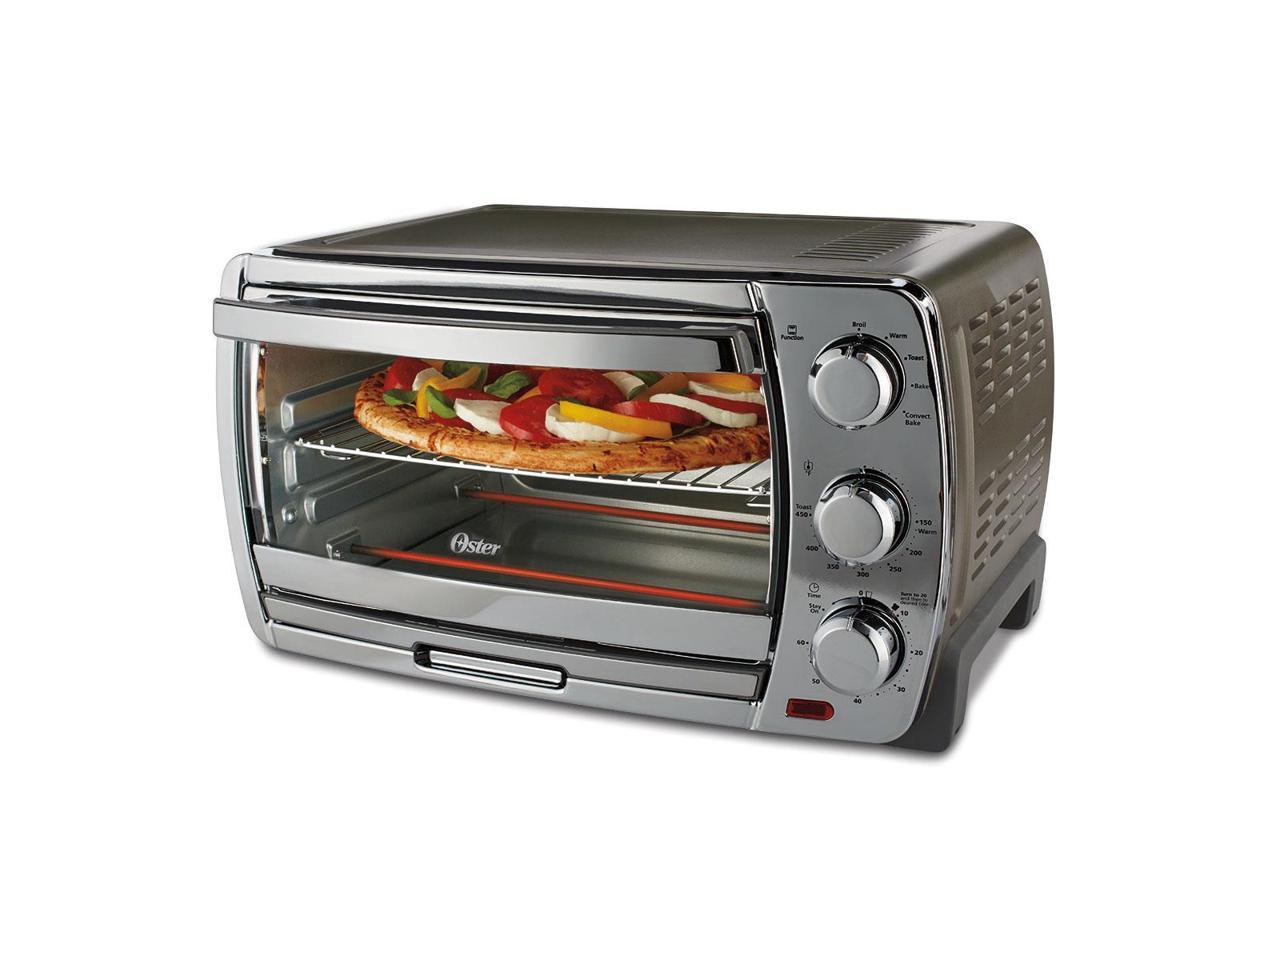 Oster Convection Countertop Oven - 1300 W - Toast, Pizza, Broil